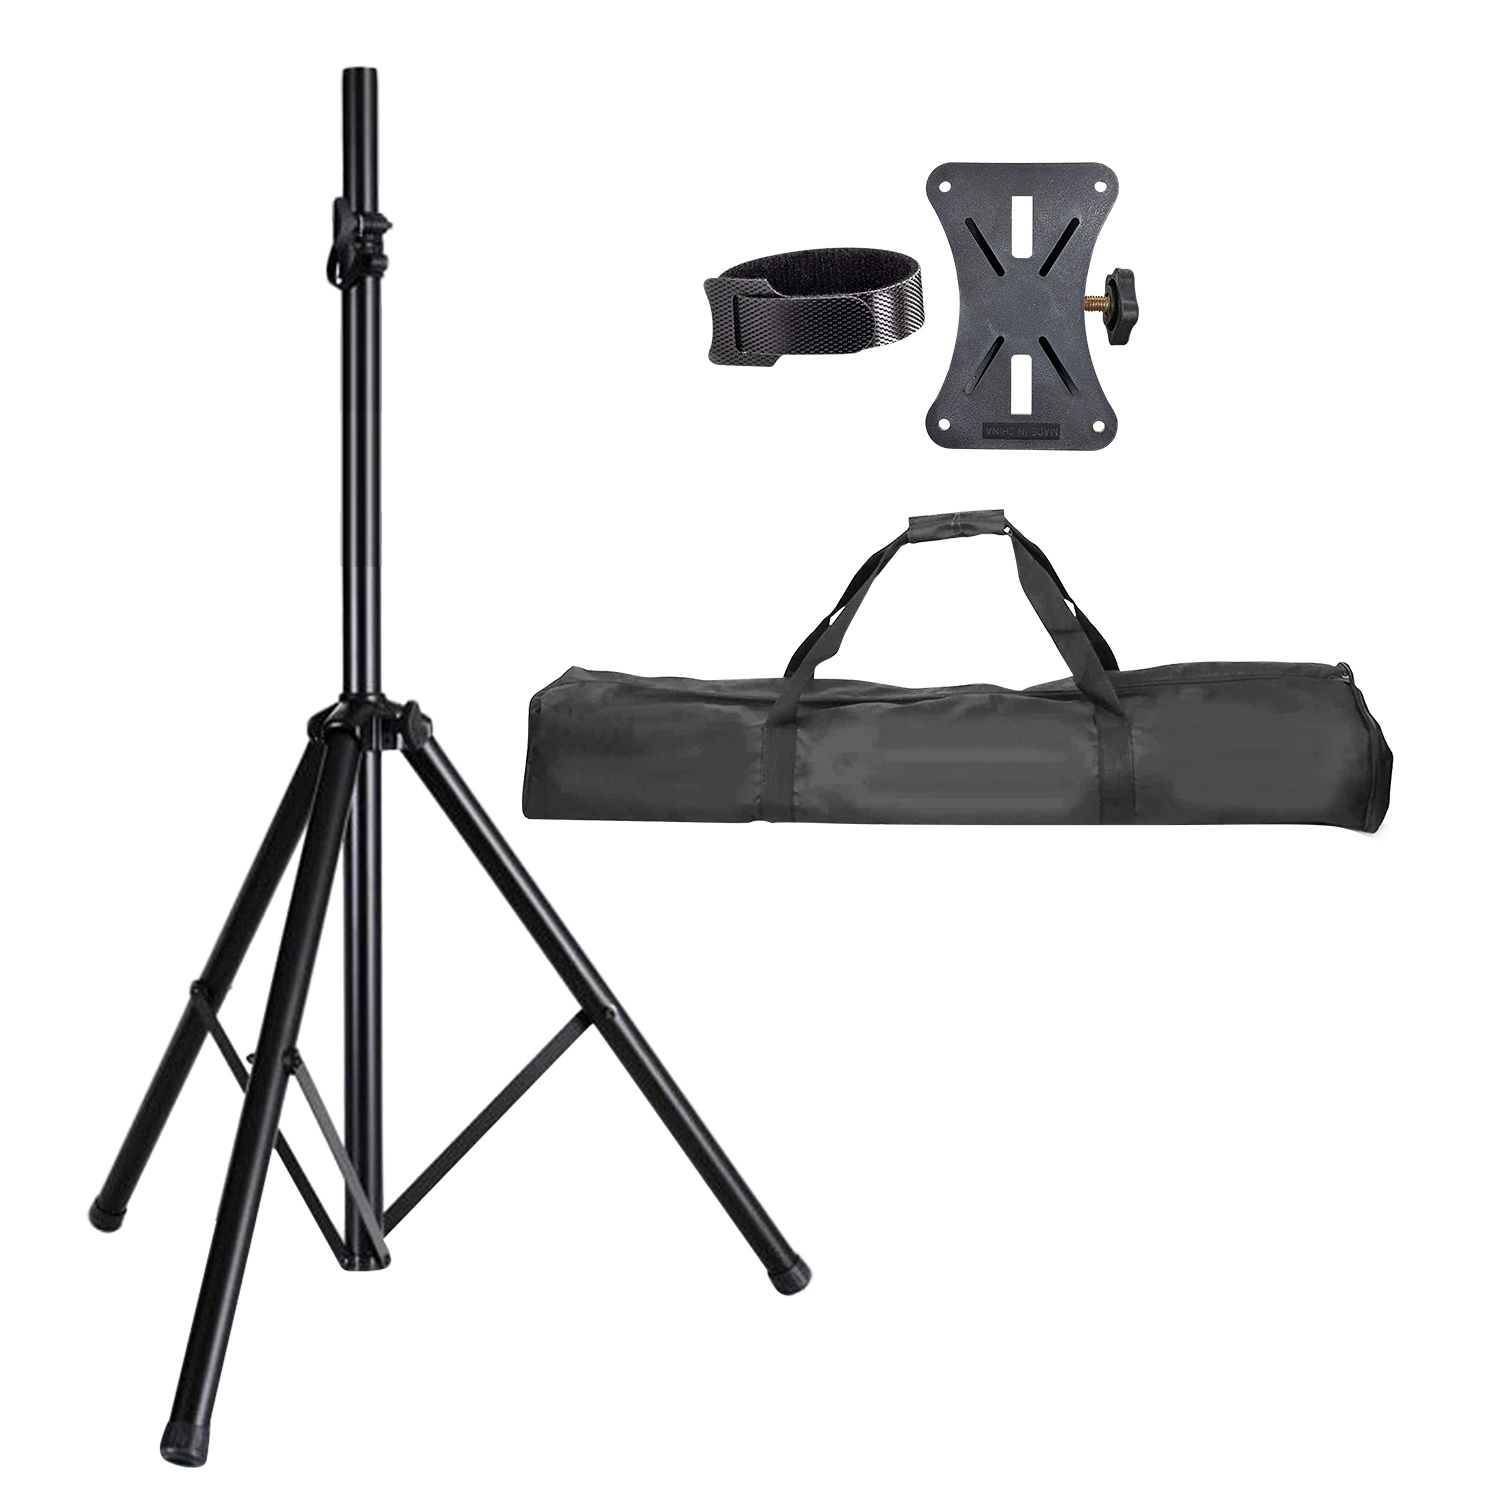 Universal Speaker Stand Mount Holder Professional Heavy Duty Tripod Structure Music Stand with Bag Adjustable Height from 41' to 72' Easy Portability and Knob Tension Lock 5 Core SS HD 1PK Bag